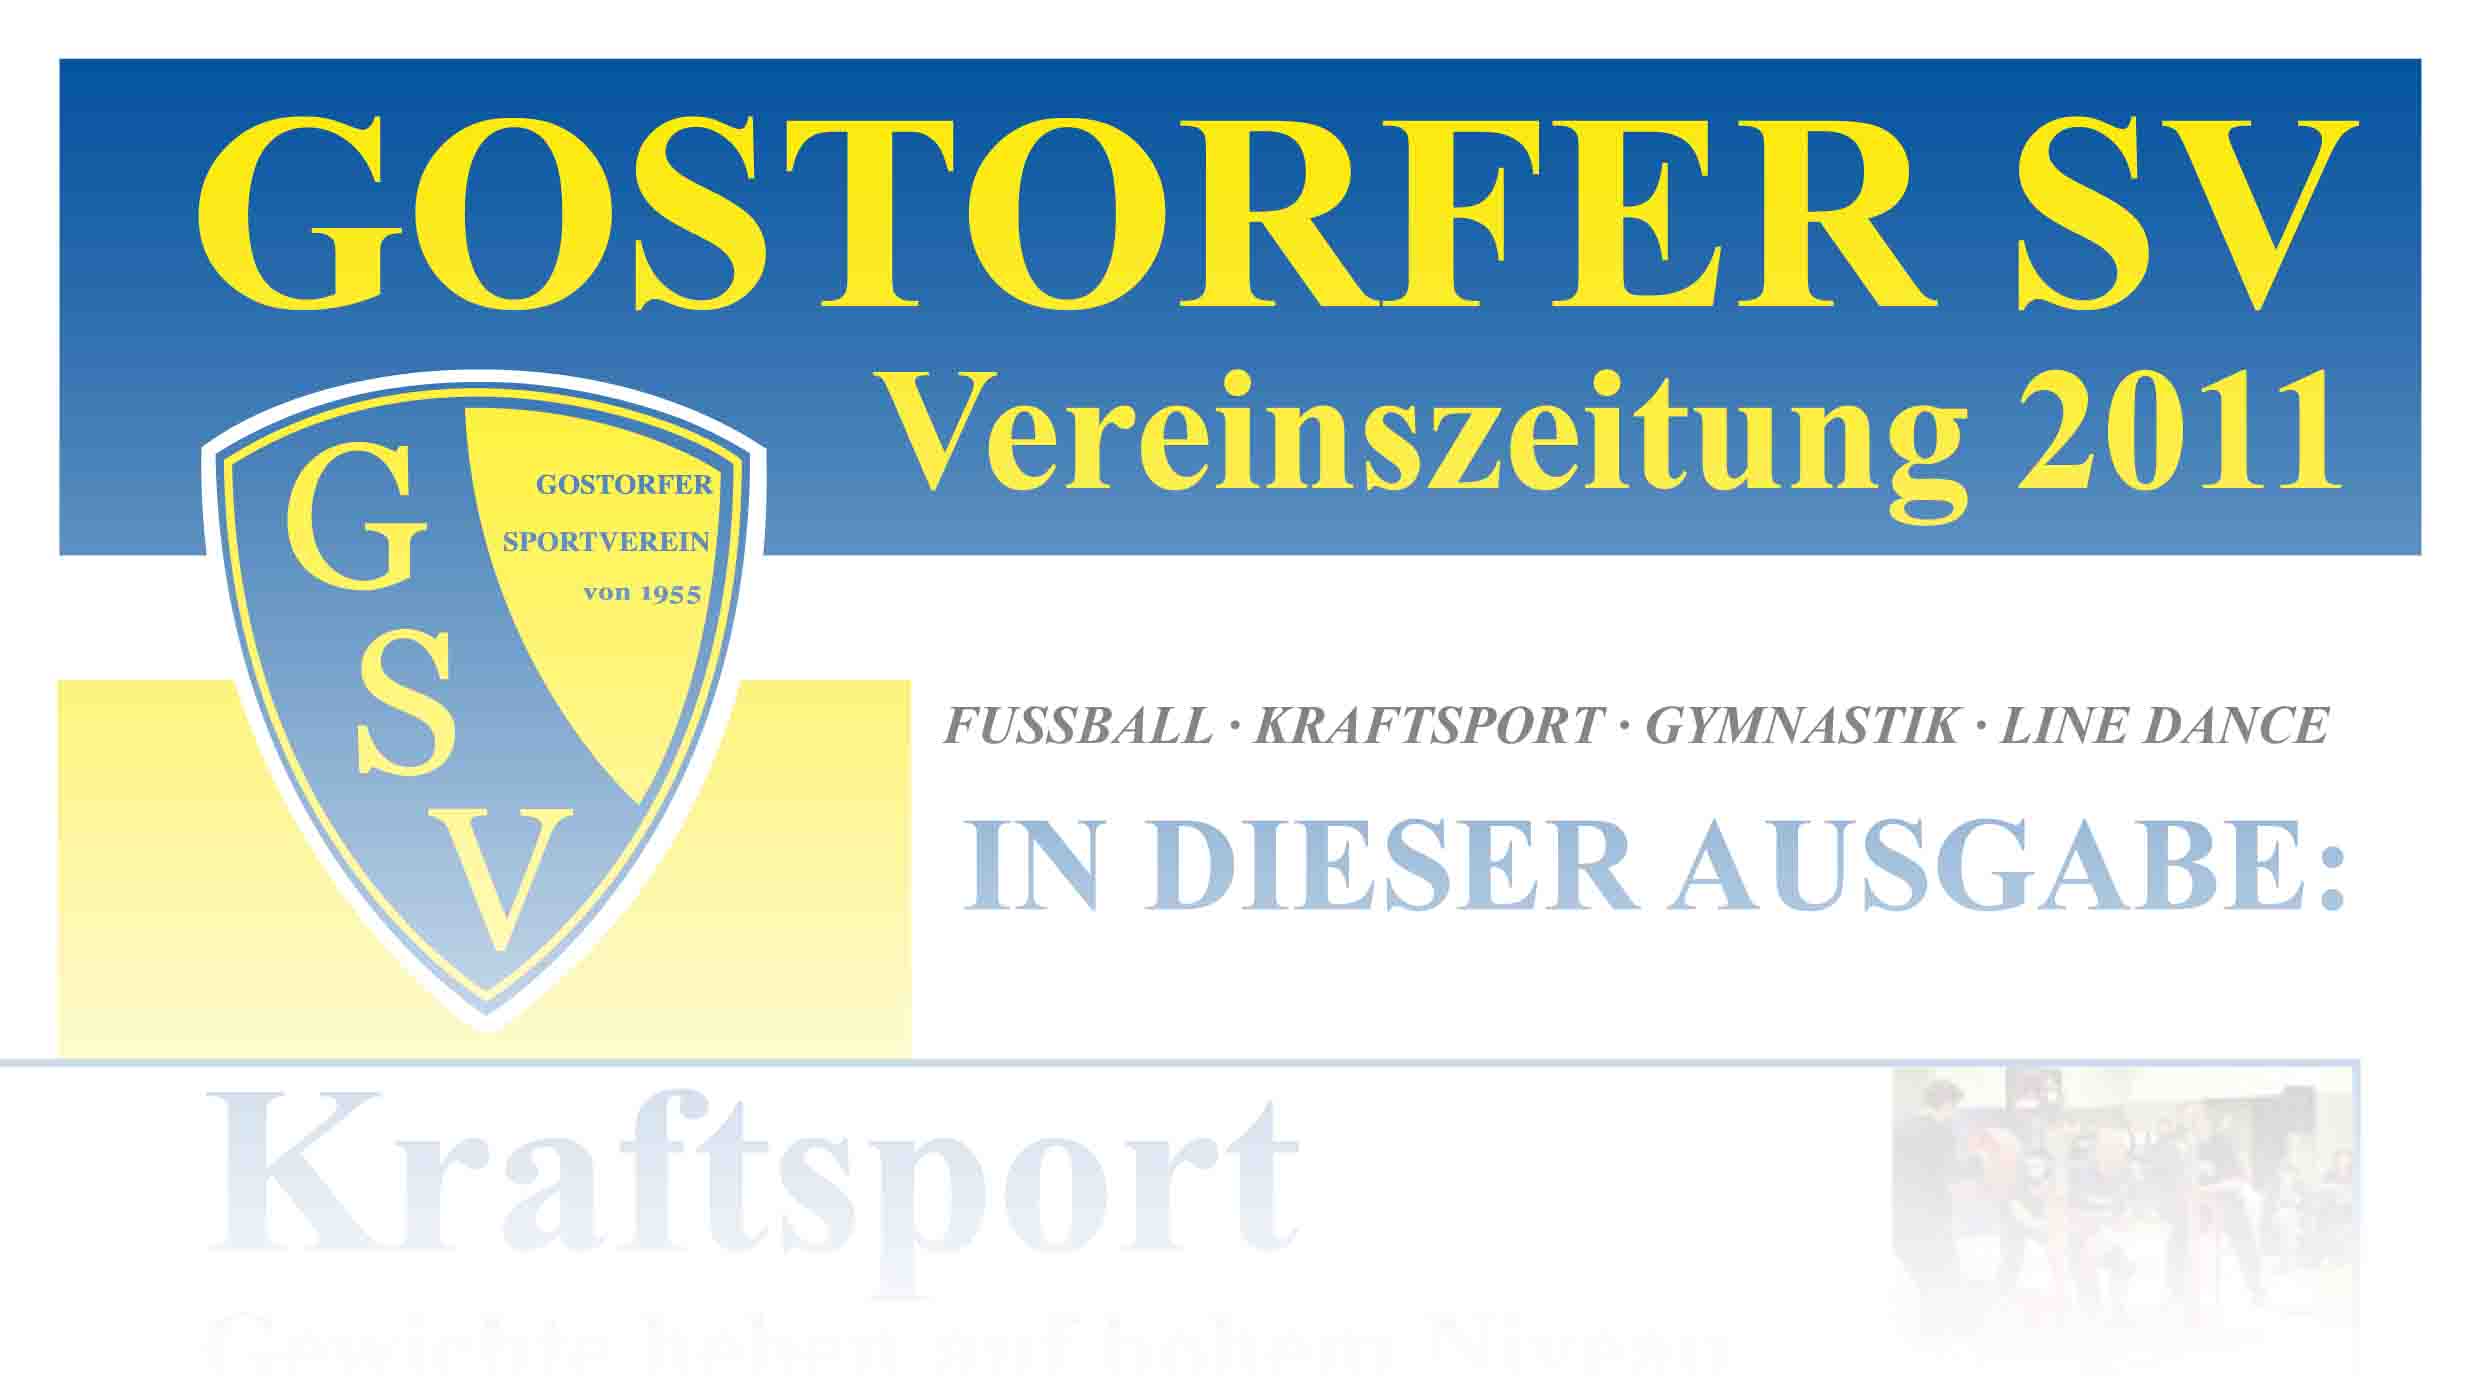 You are currently viewing Vereinszeitung 2011